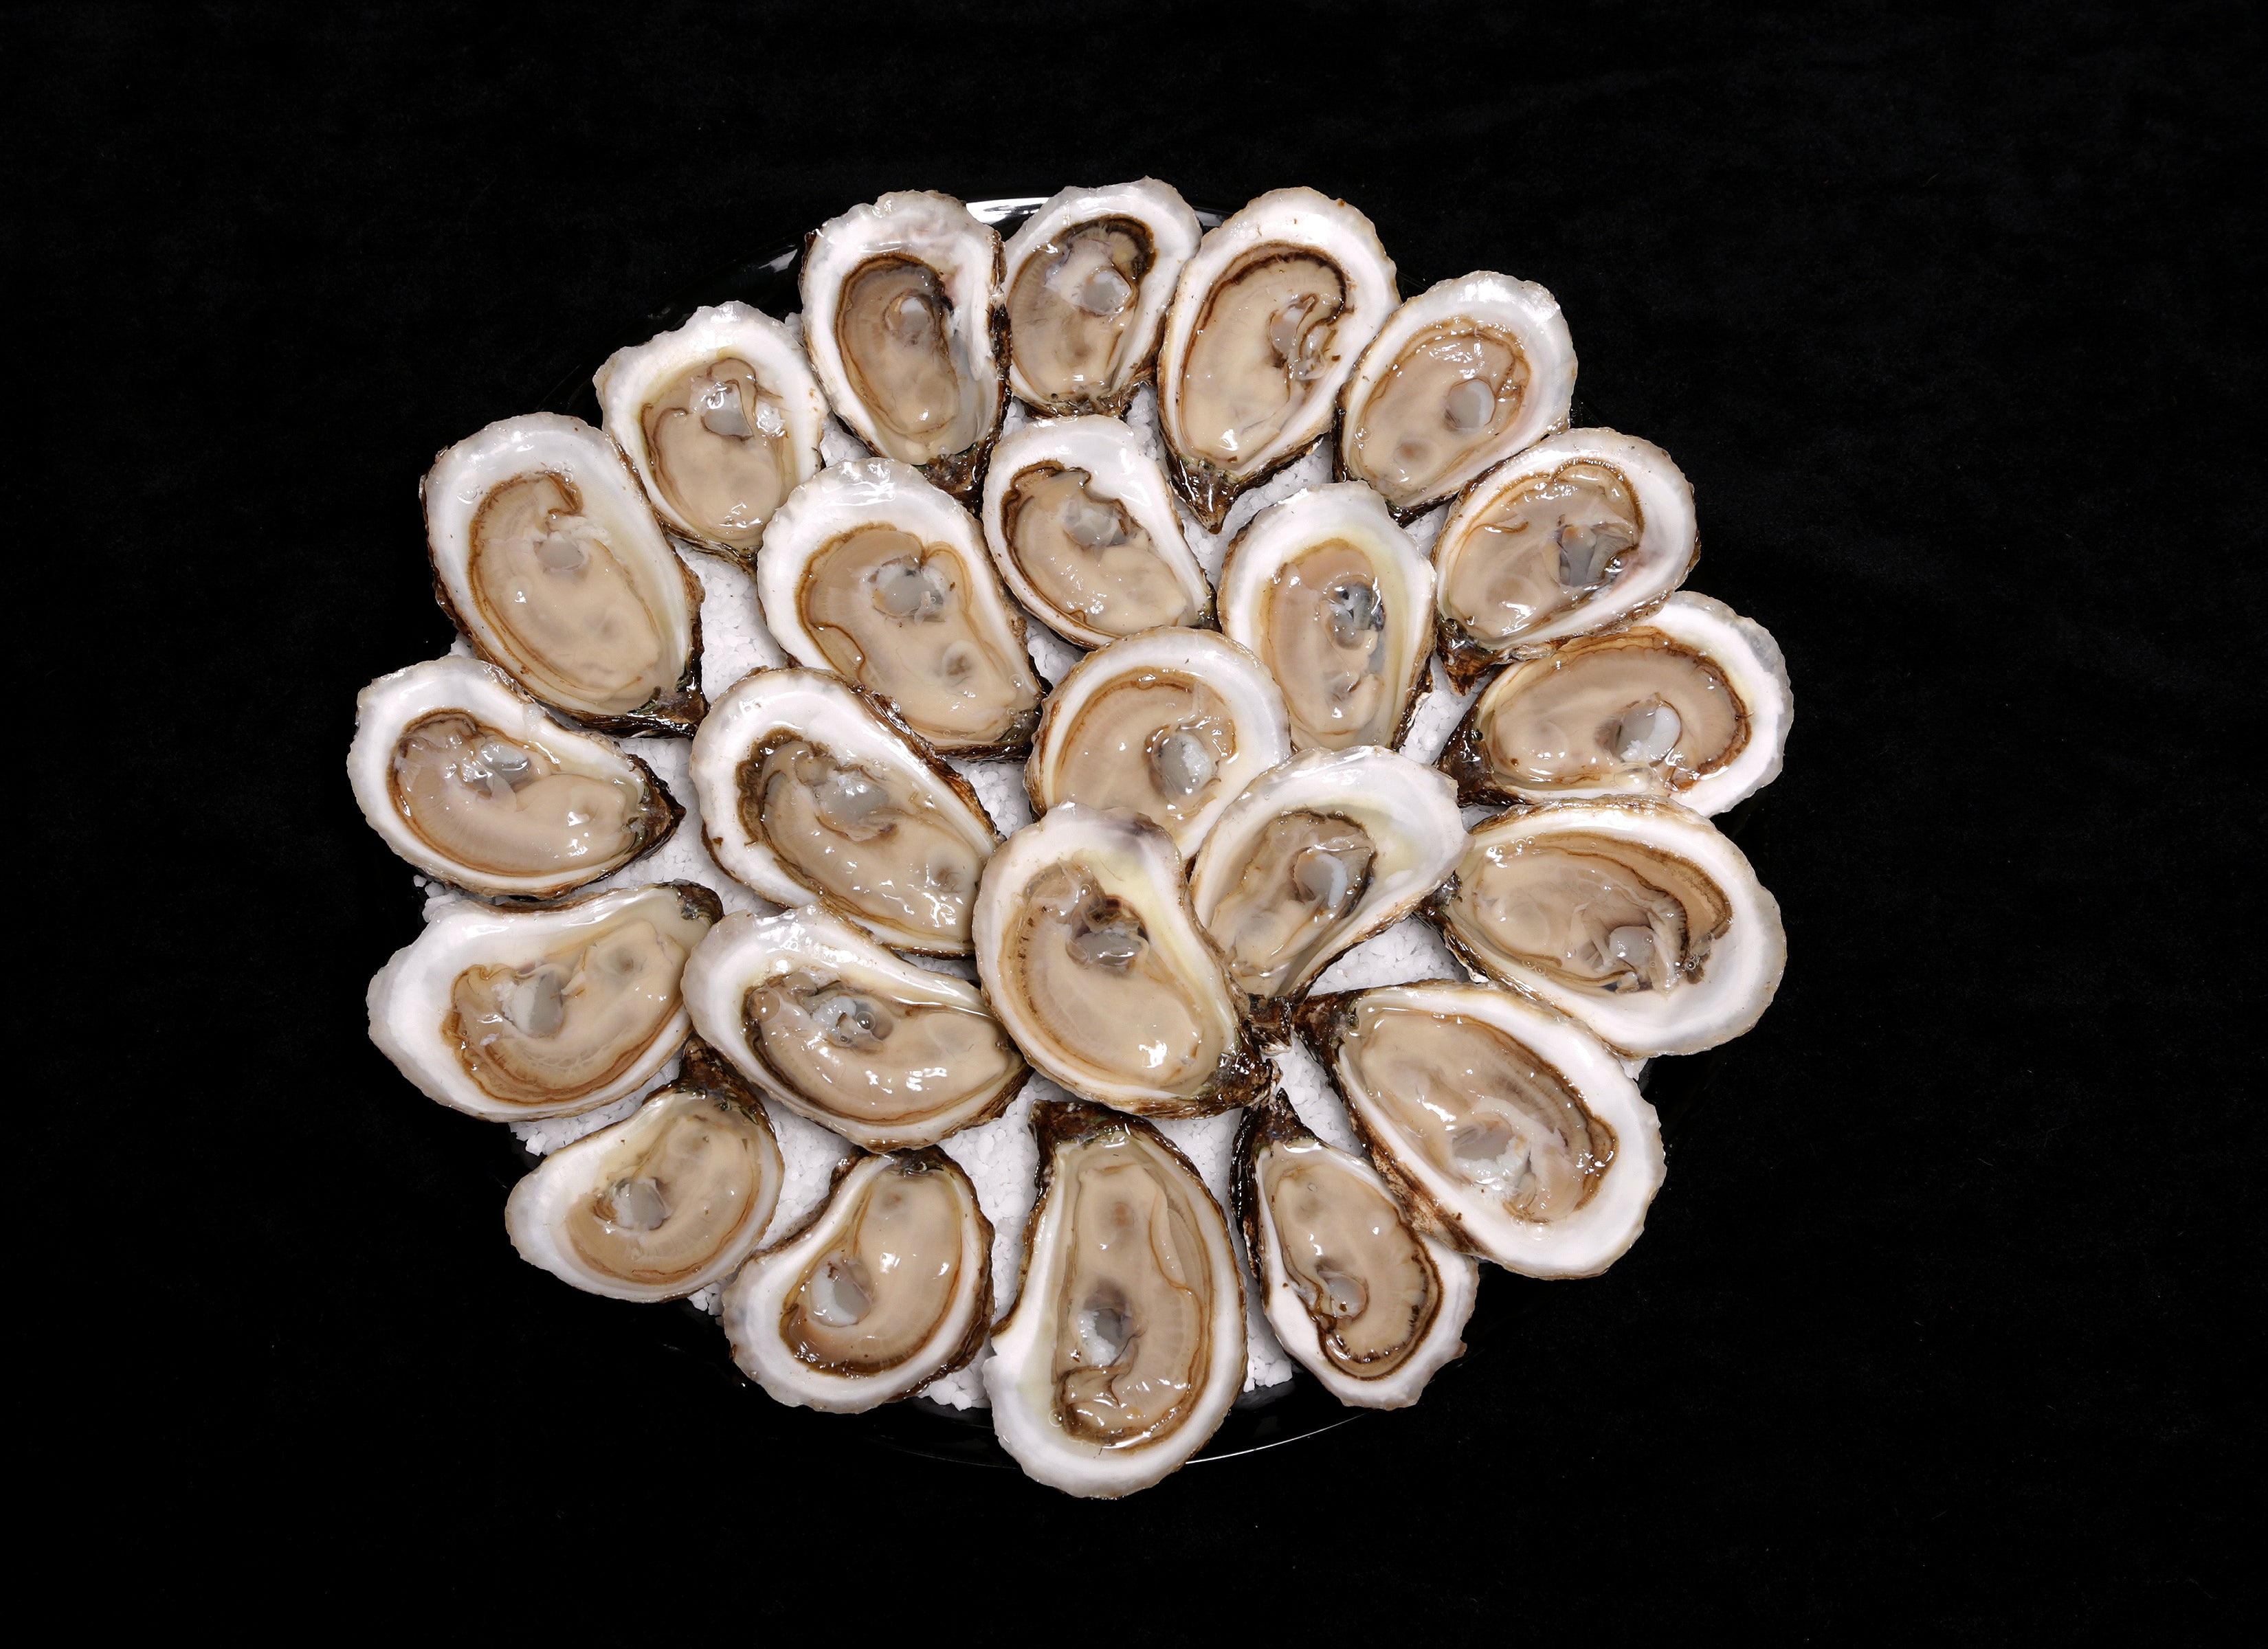 Shucked Lucky Limes Oyster Platter - 25 un. on Ice